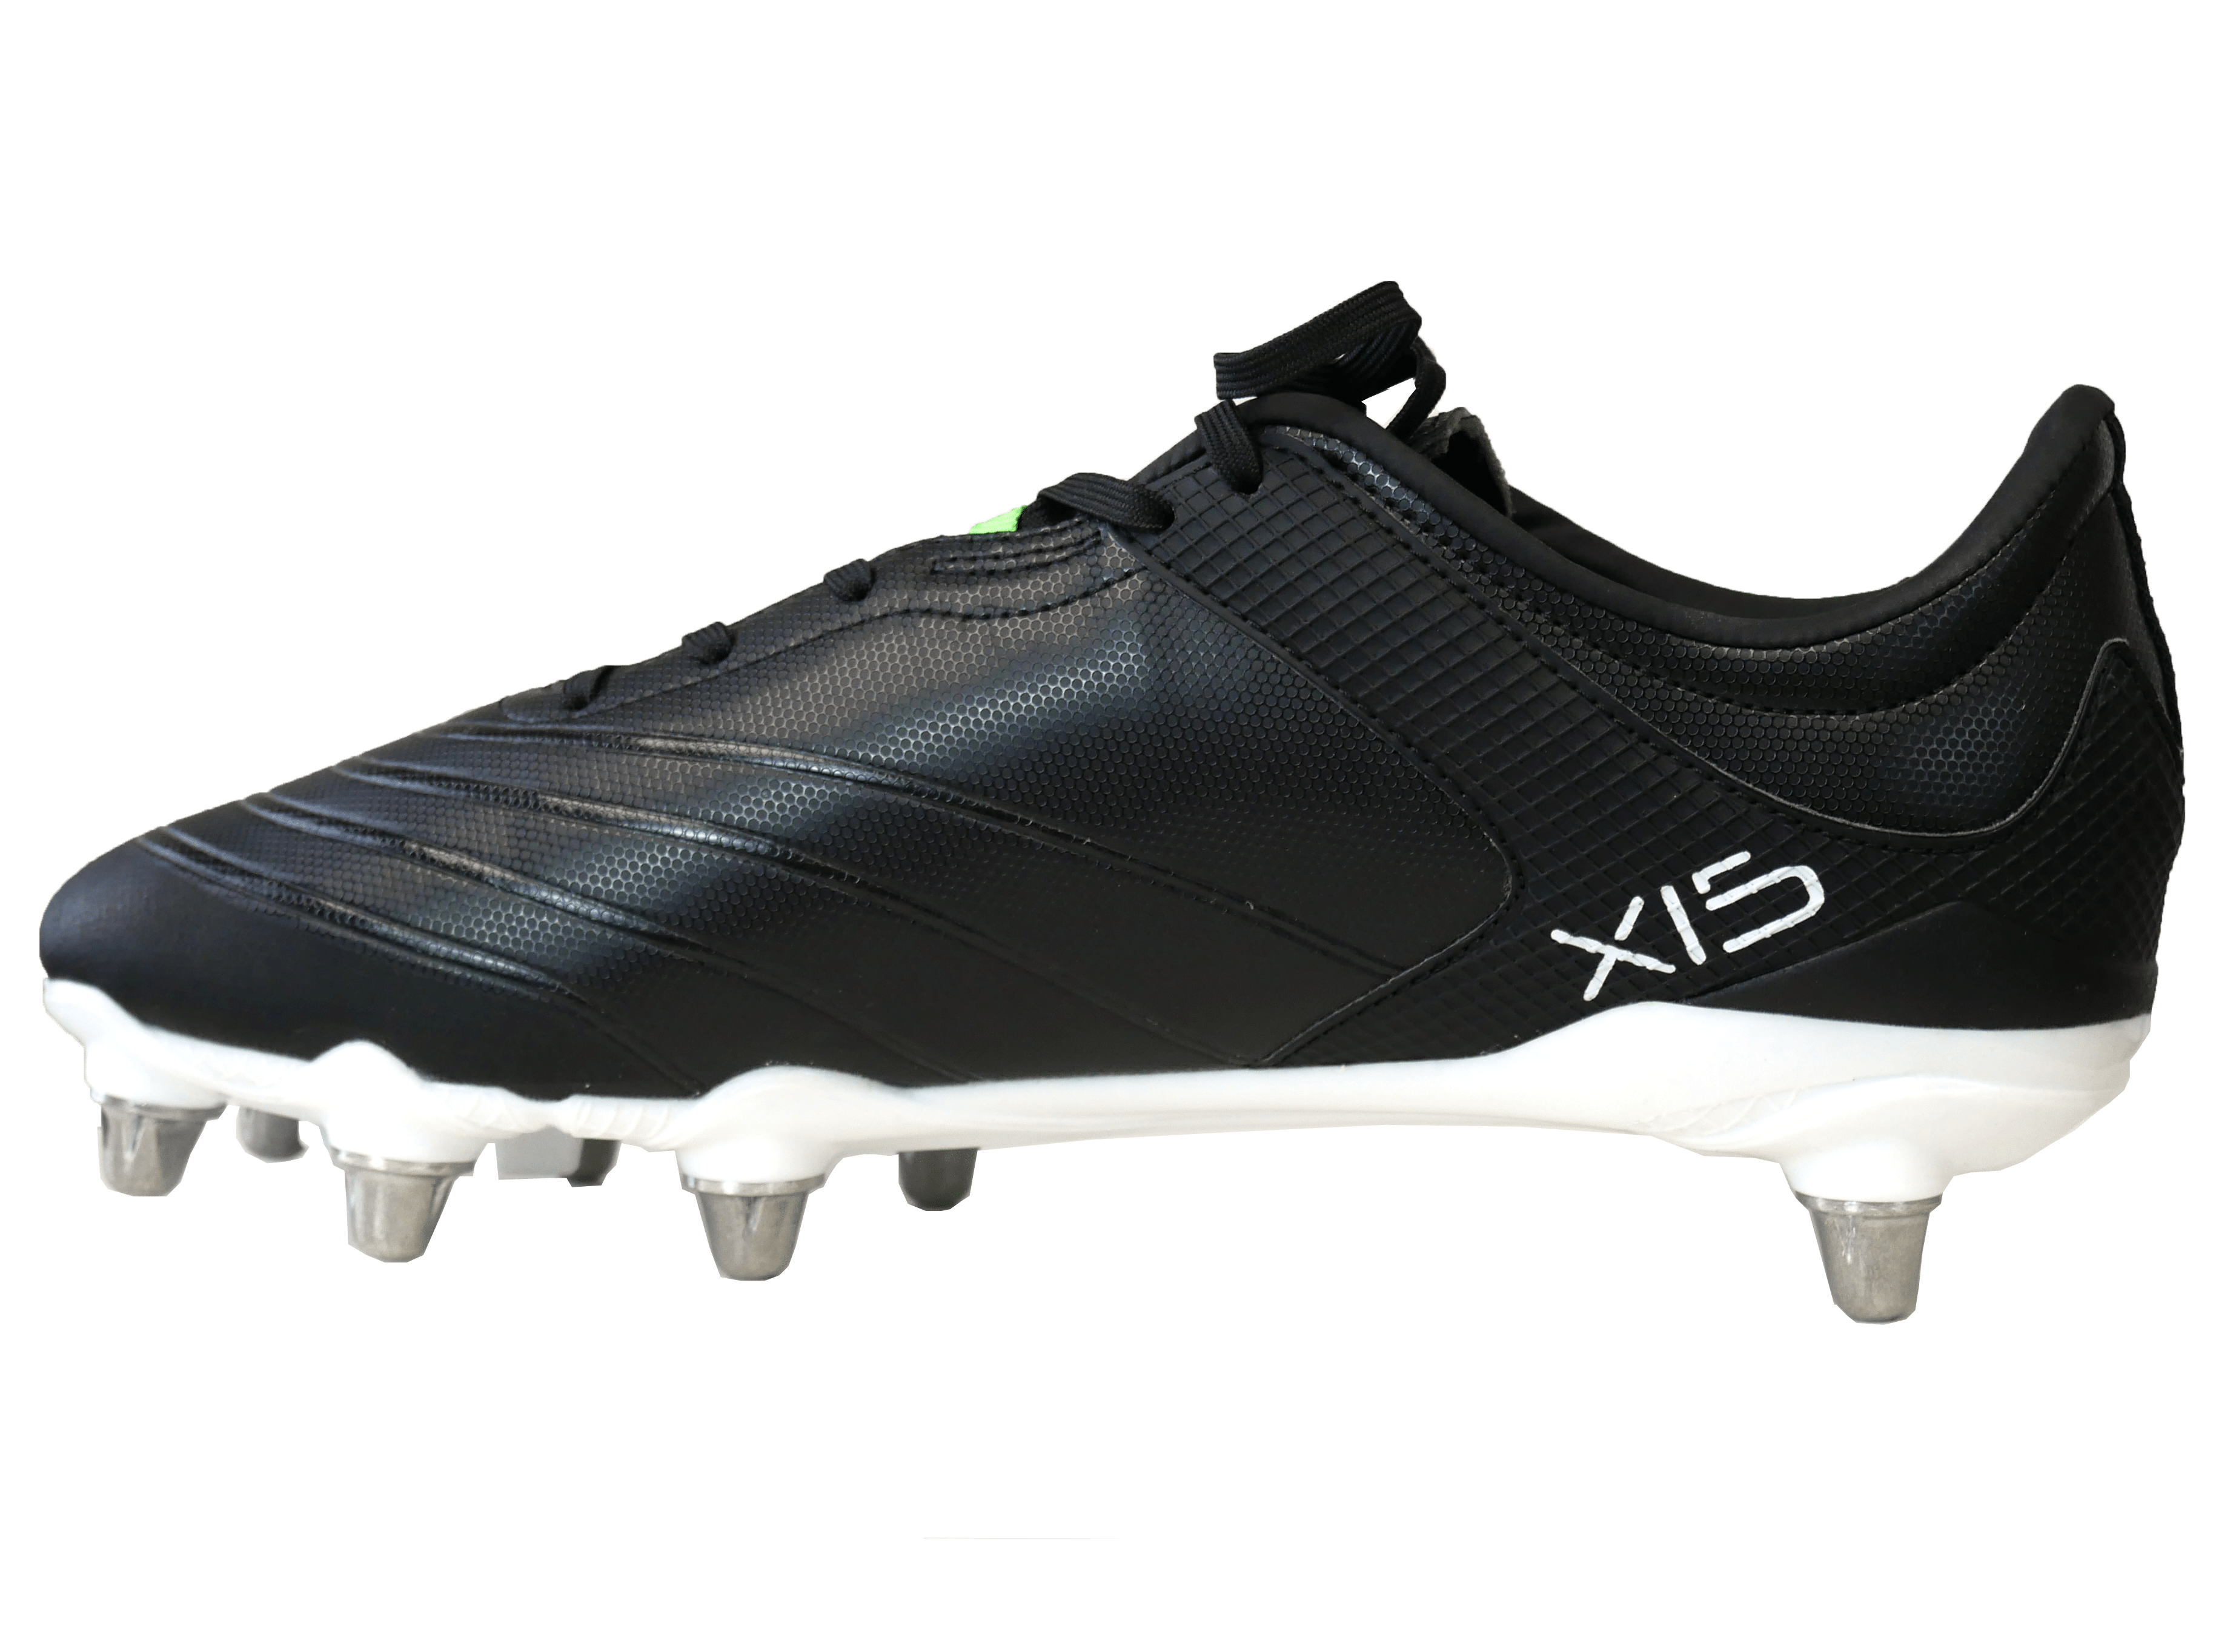 Gilbert Sidestep X15 Rugby Cleat - Soft Ground Boot - Black - SKU ...